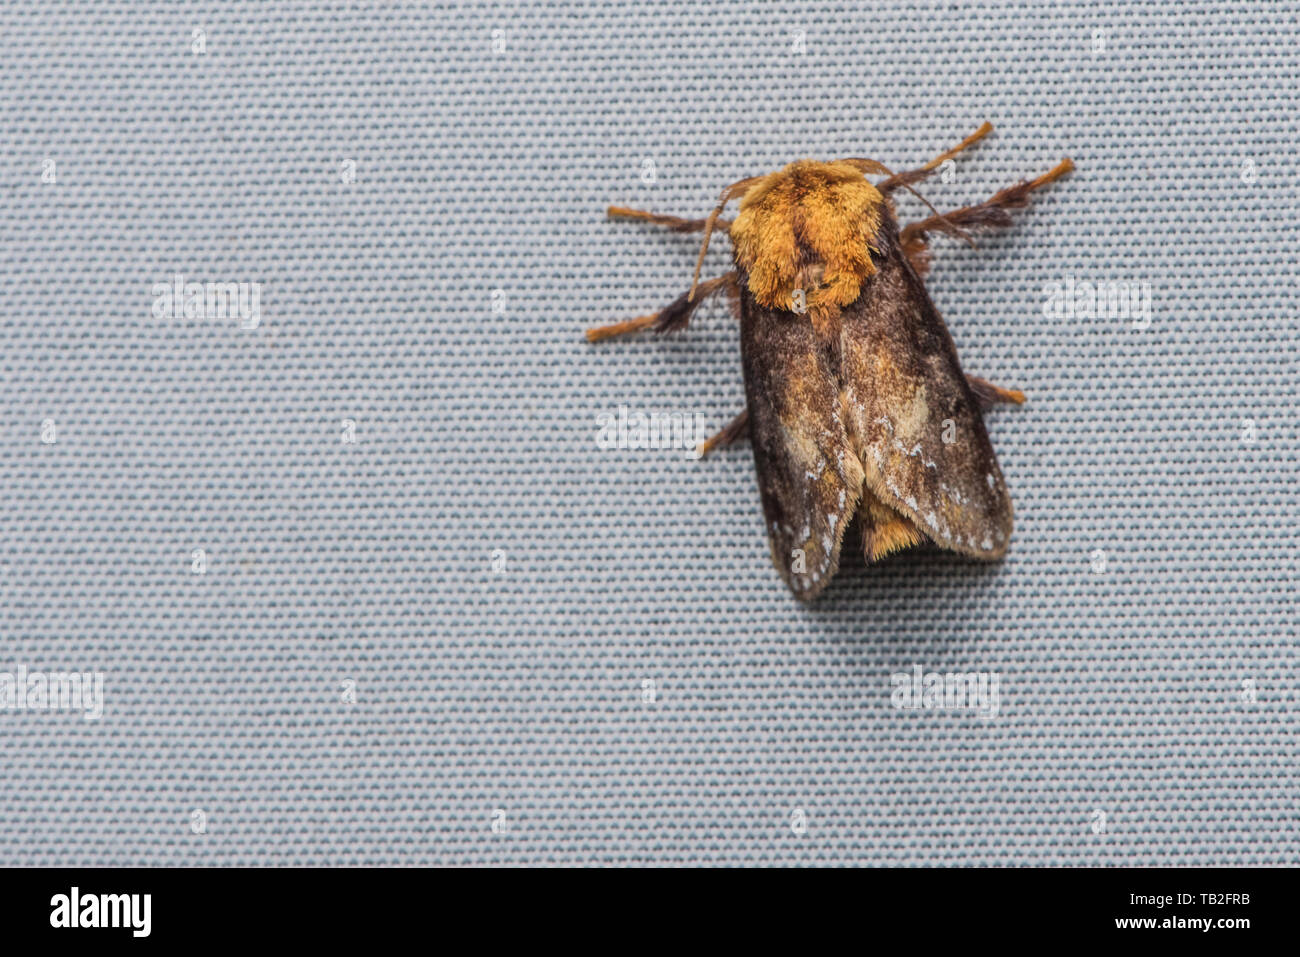 Miresa clarissa, a type of slug moth in the limacodidae family from the Ecuadorian cloud forest. Stock Photo